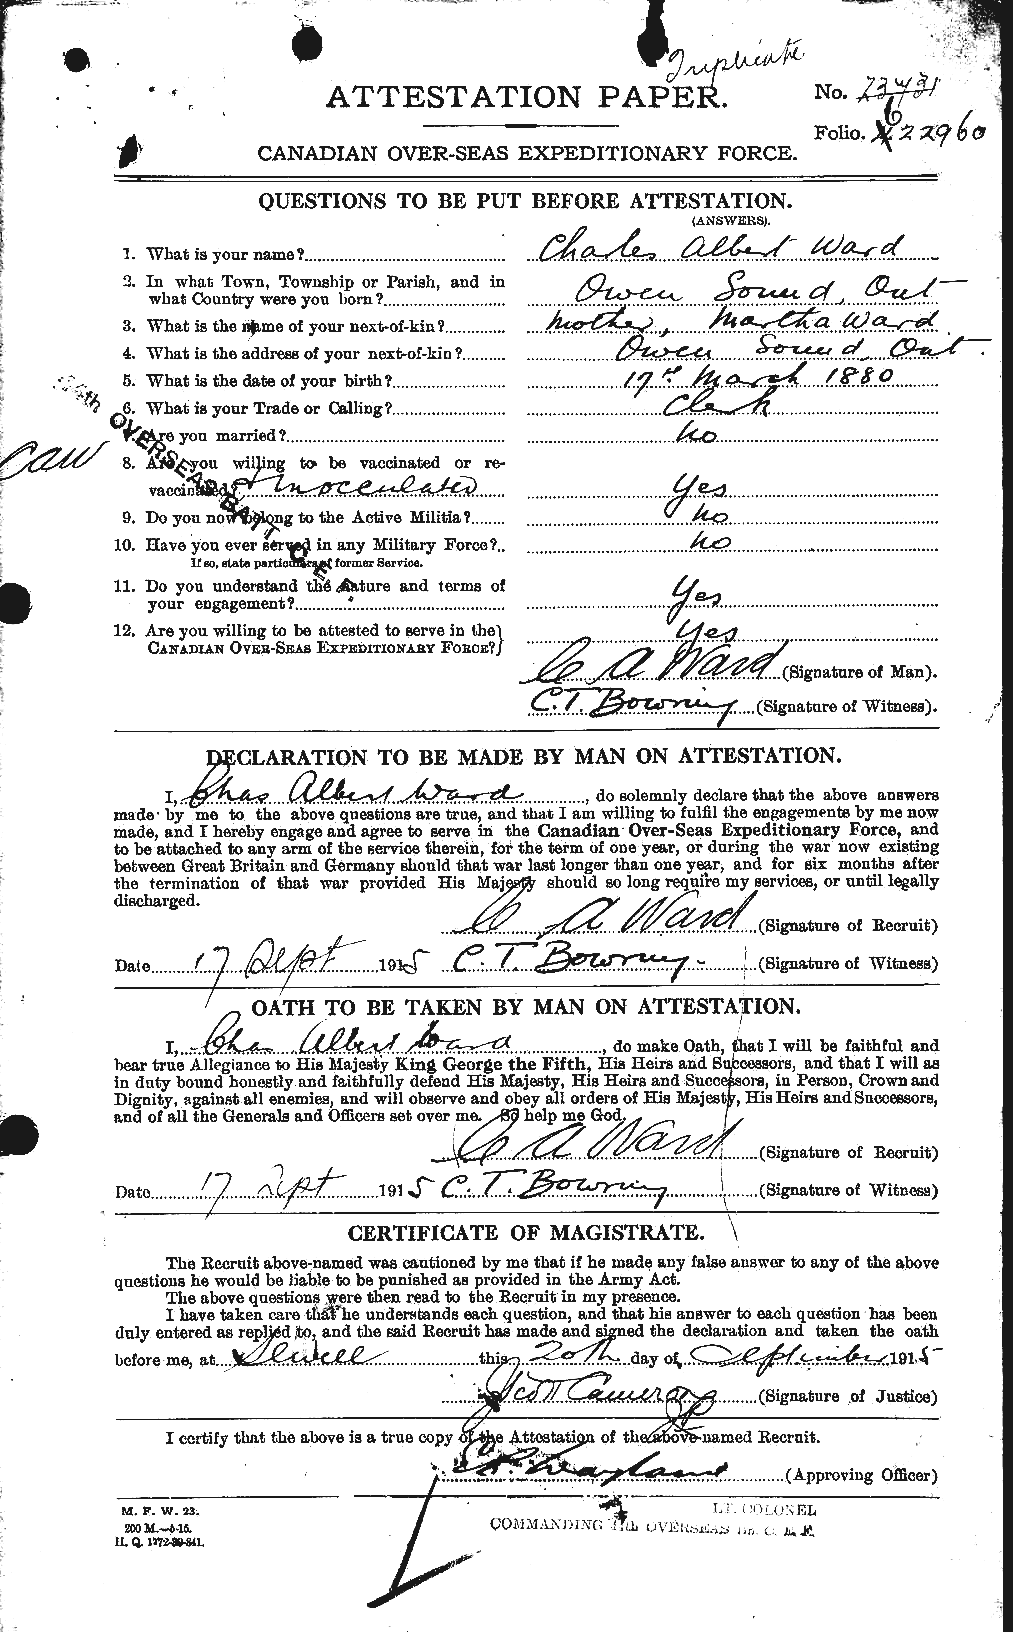 Personnel Records of the First World War - CEF 657570a